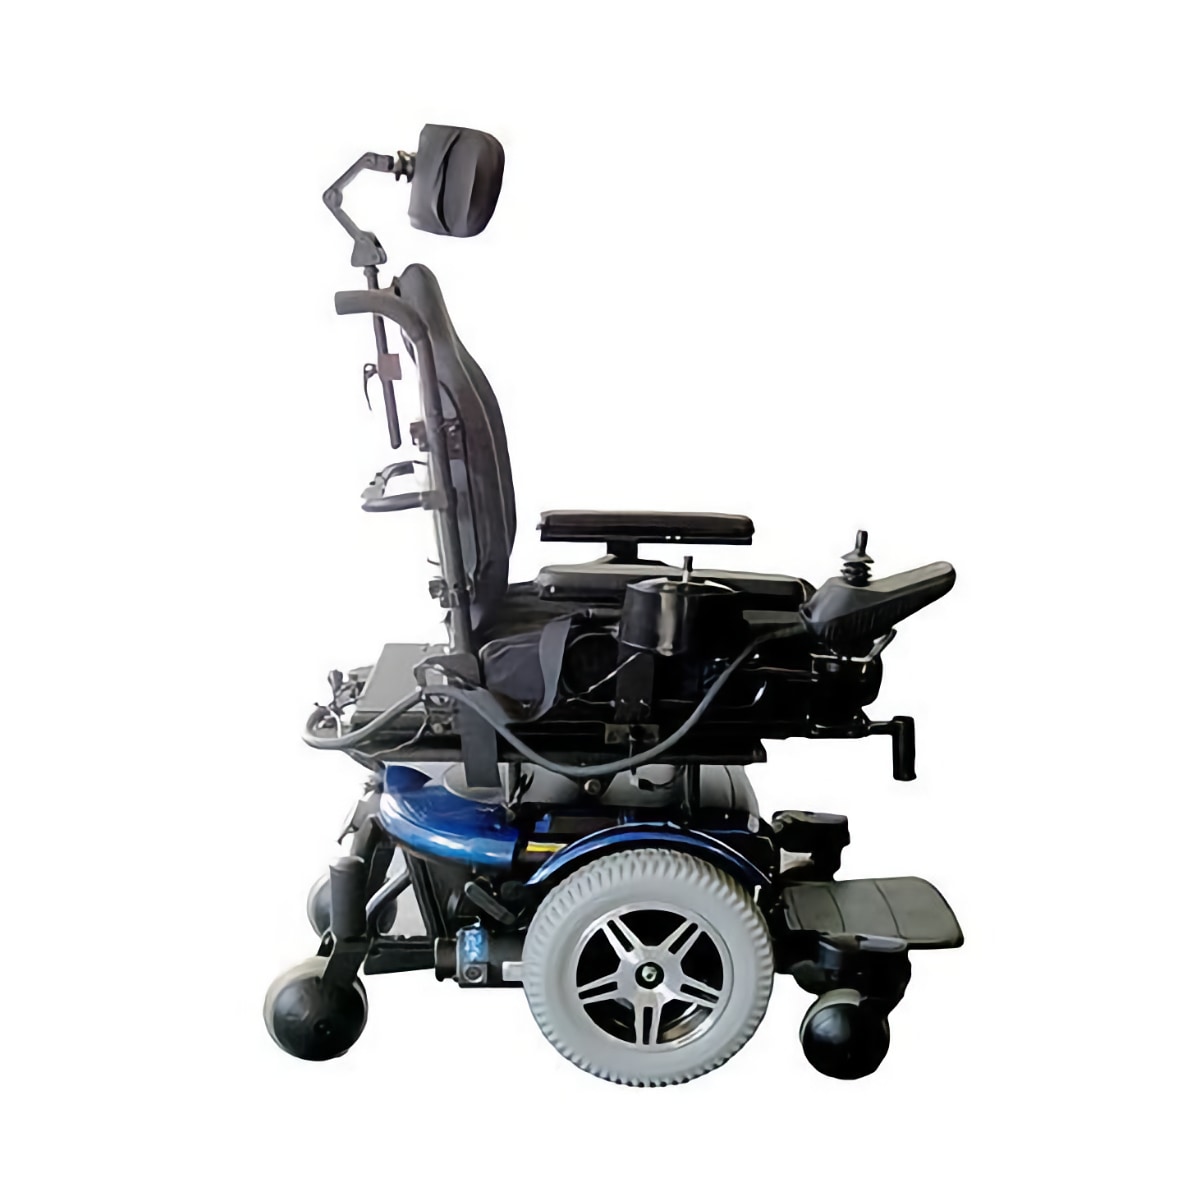 Quantum 600 power wheel chair with blue accents